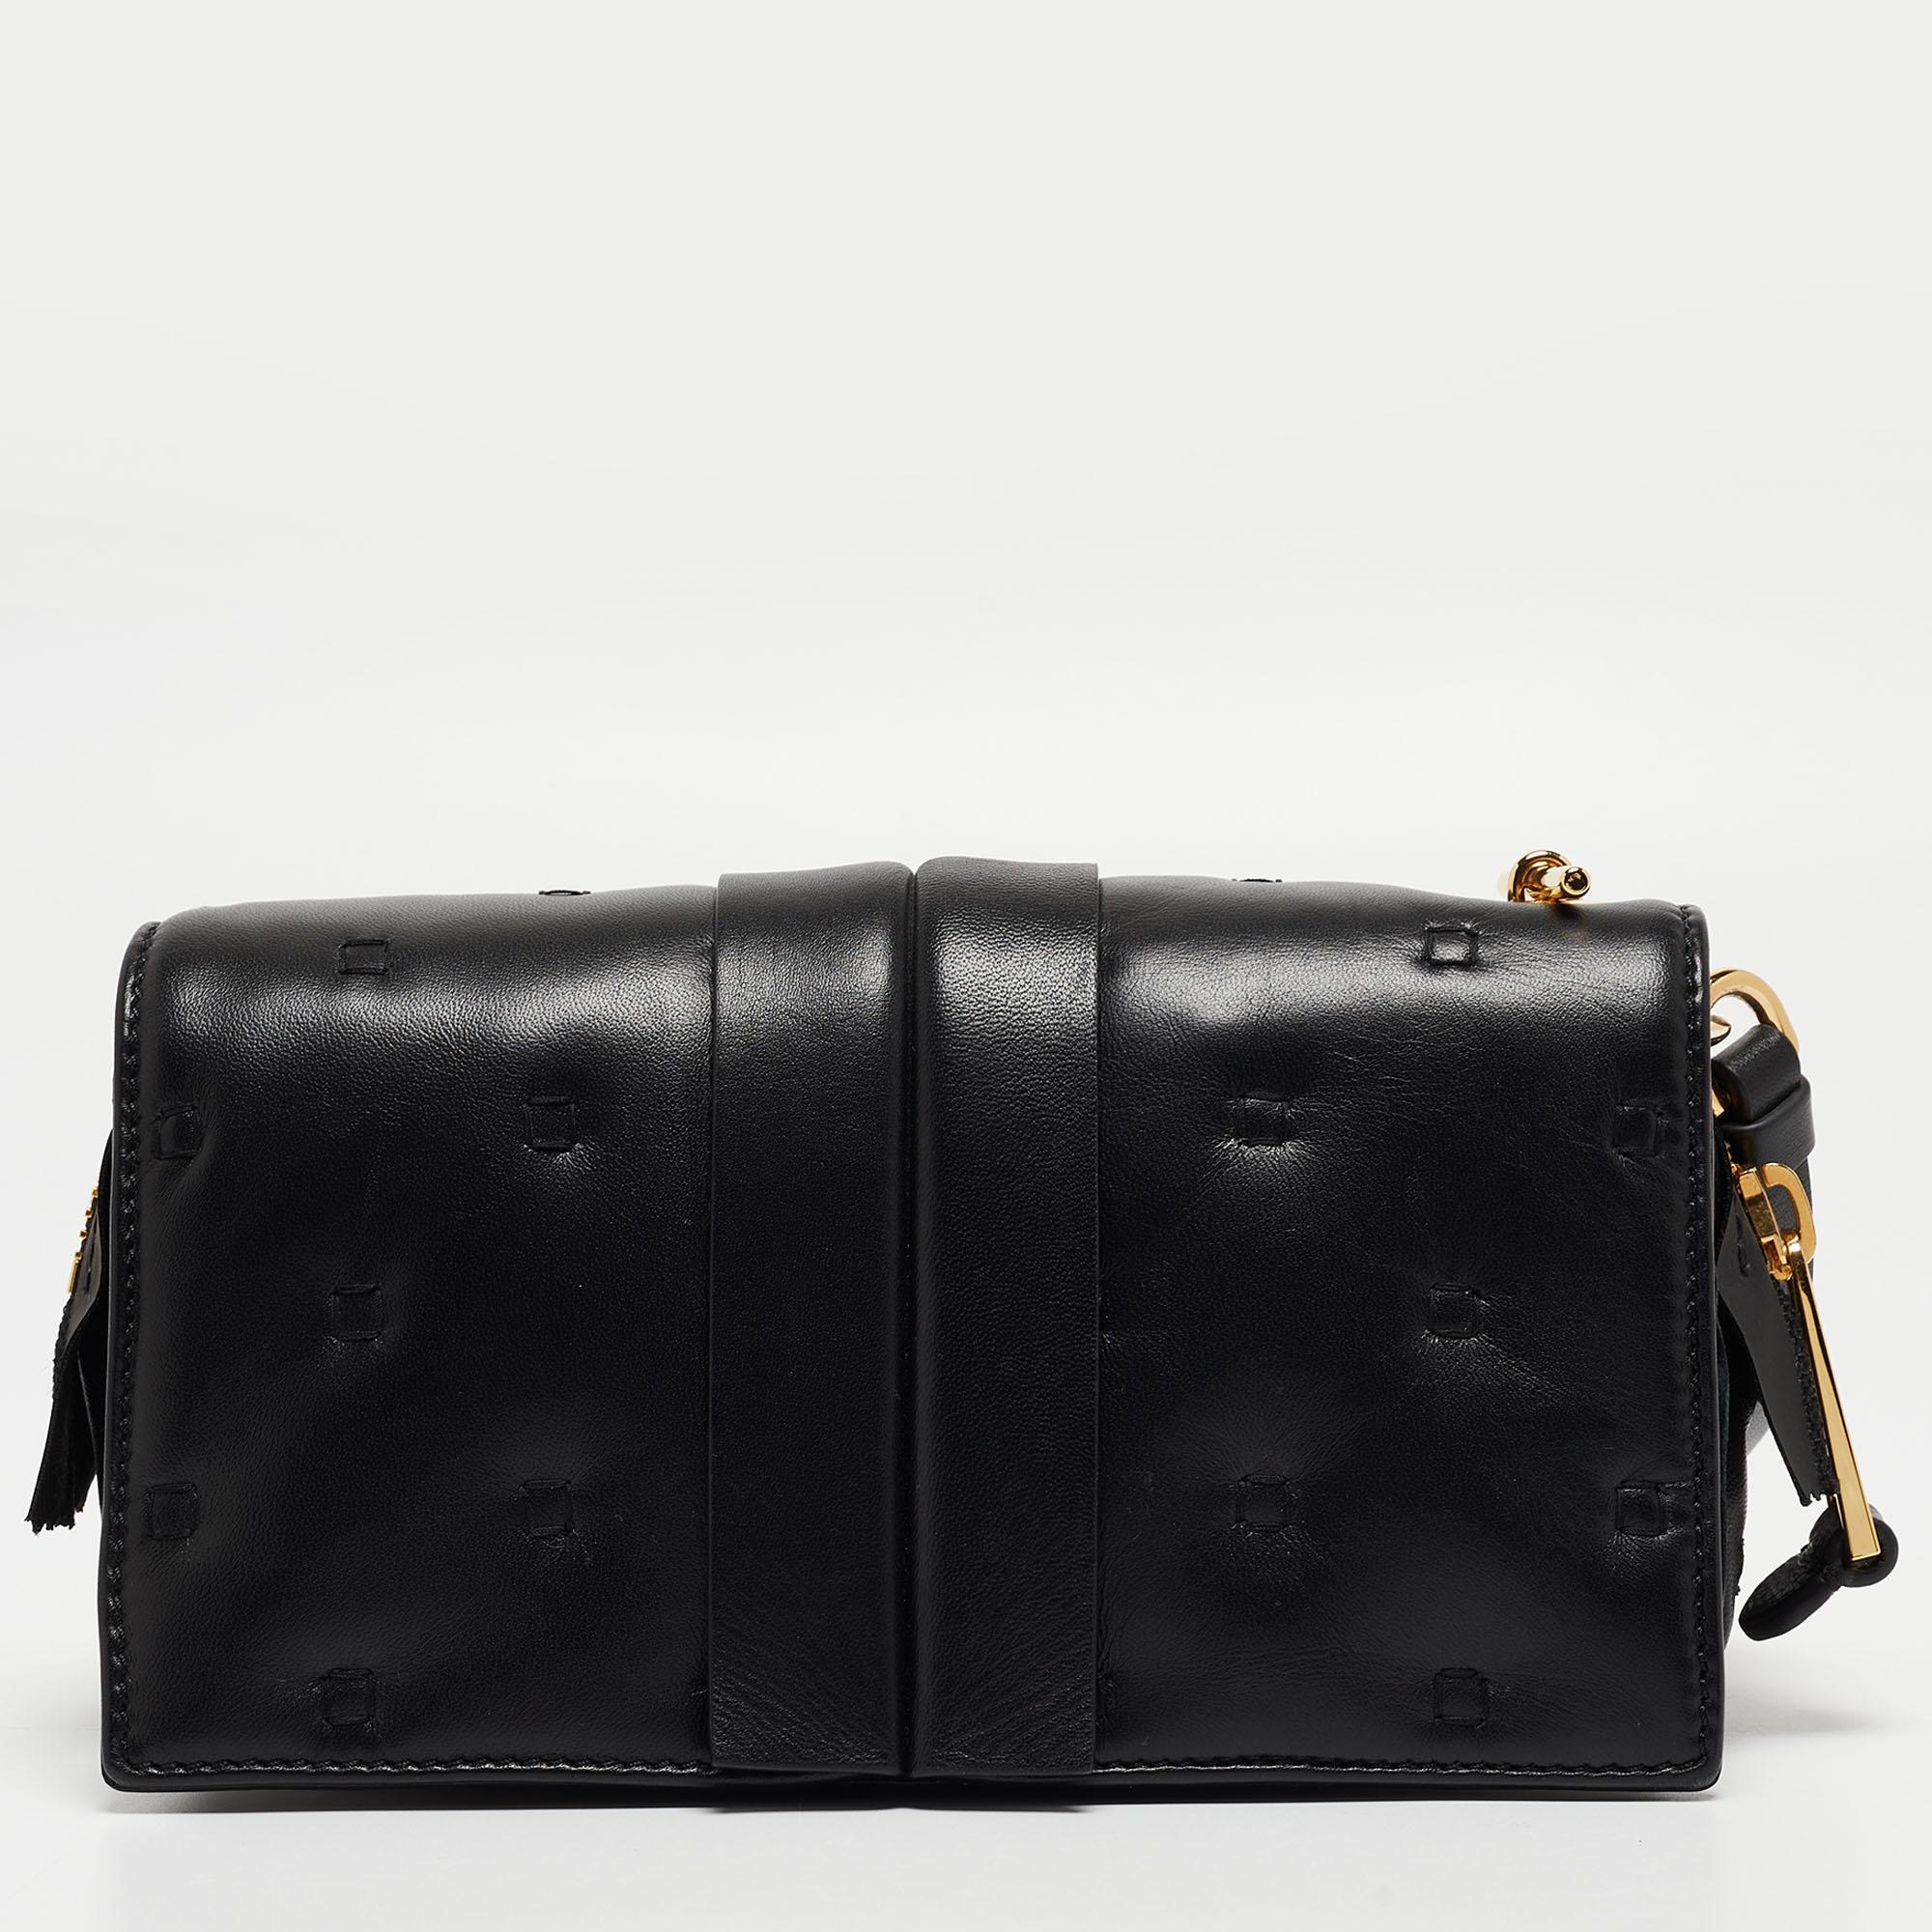 Functional and fashionable, this clutch is a classy styling choice. It is crafted from quality materials, and its lined interior will keep your evening essentials in a neat way.

Includes: Original Dustbag

